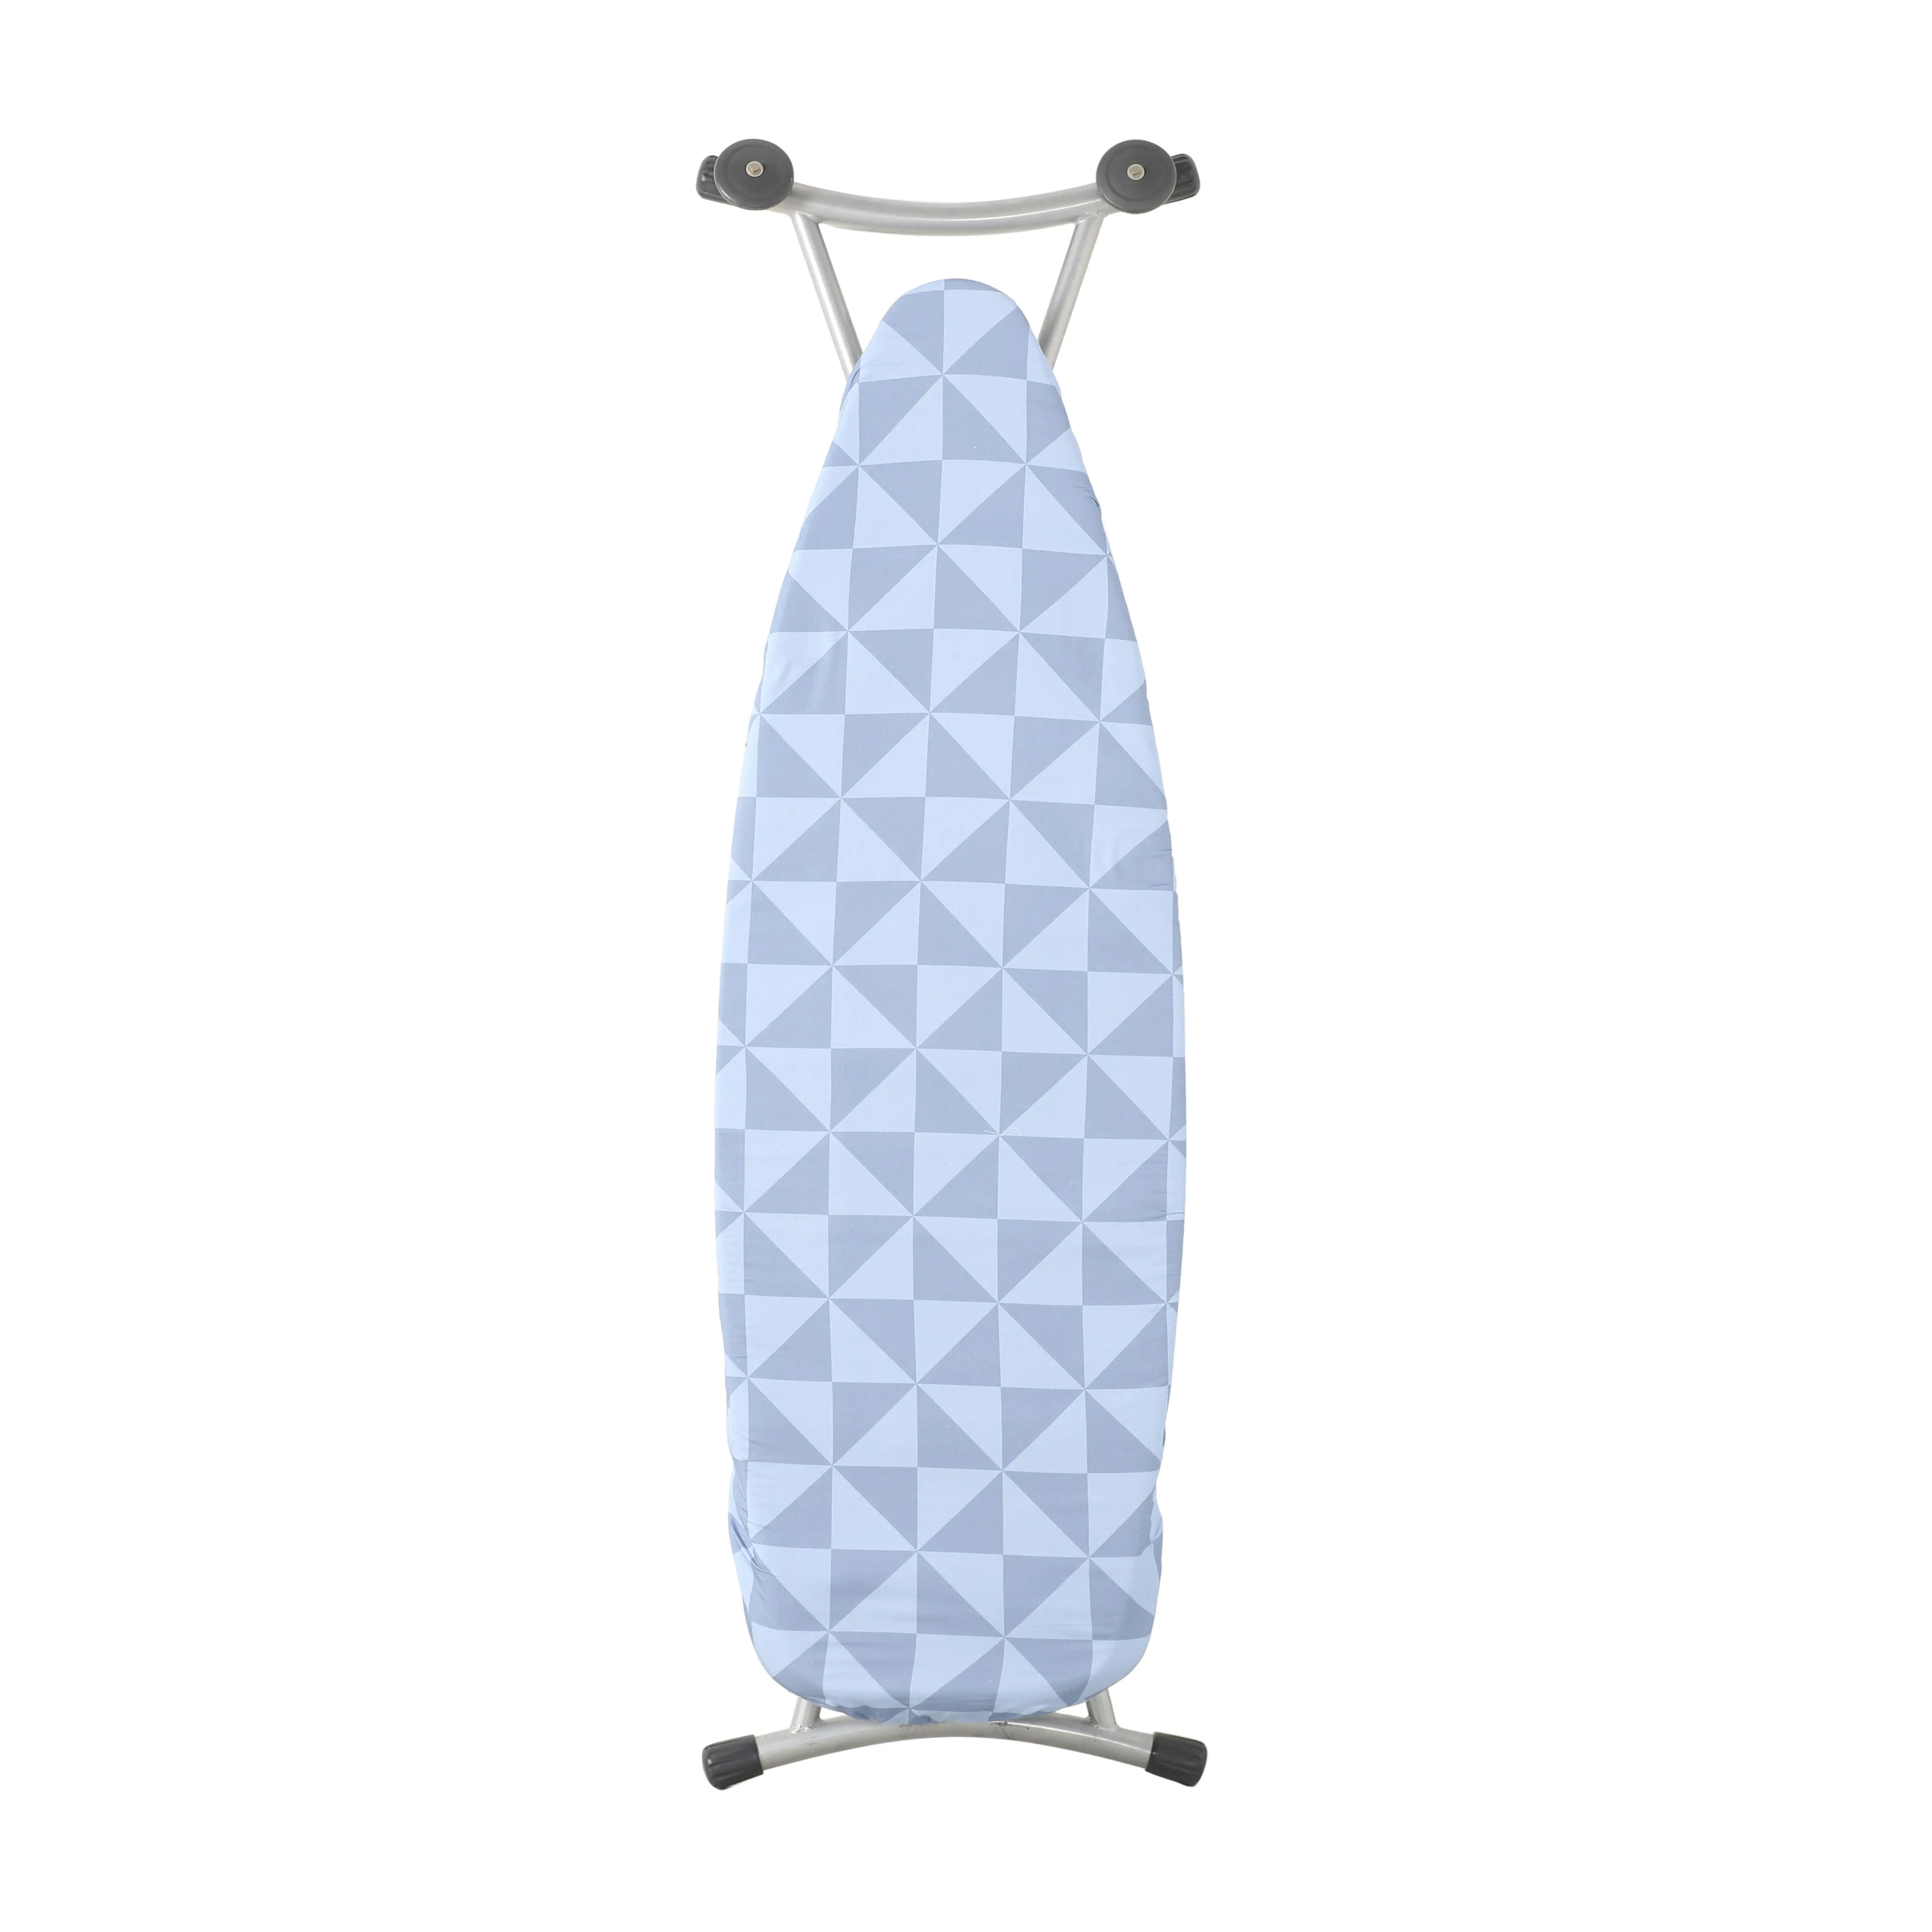 New Design 3個Hook Nose Pocket Folding Household Ironing Board Cover